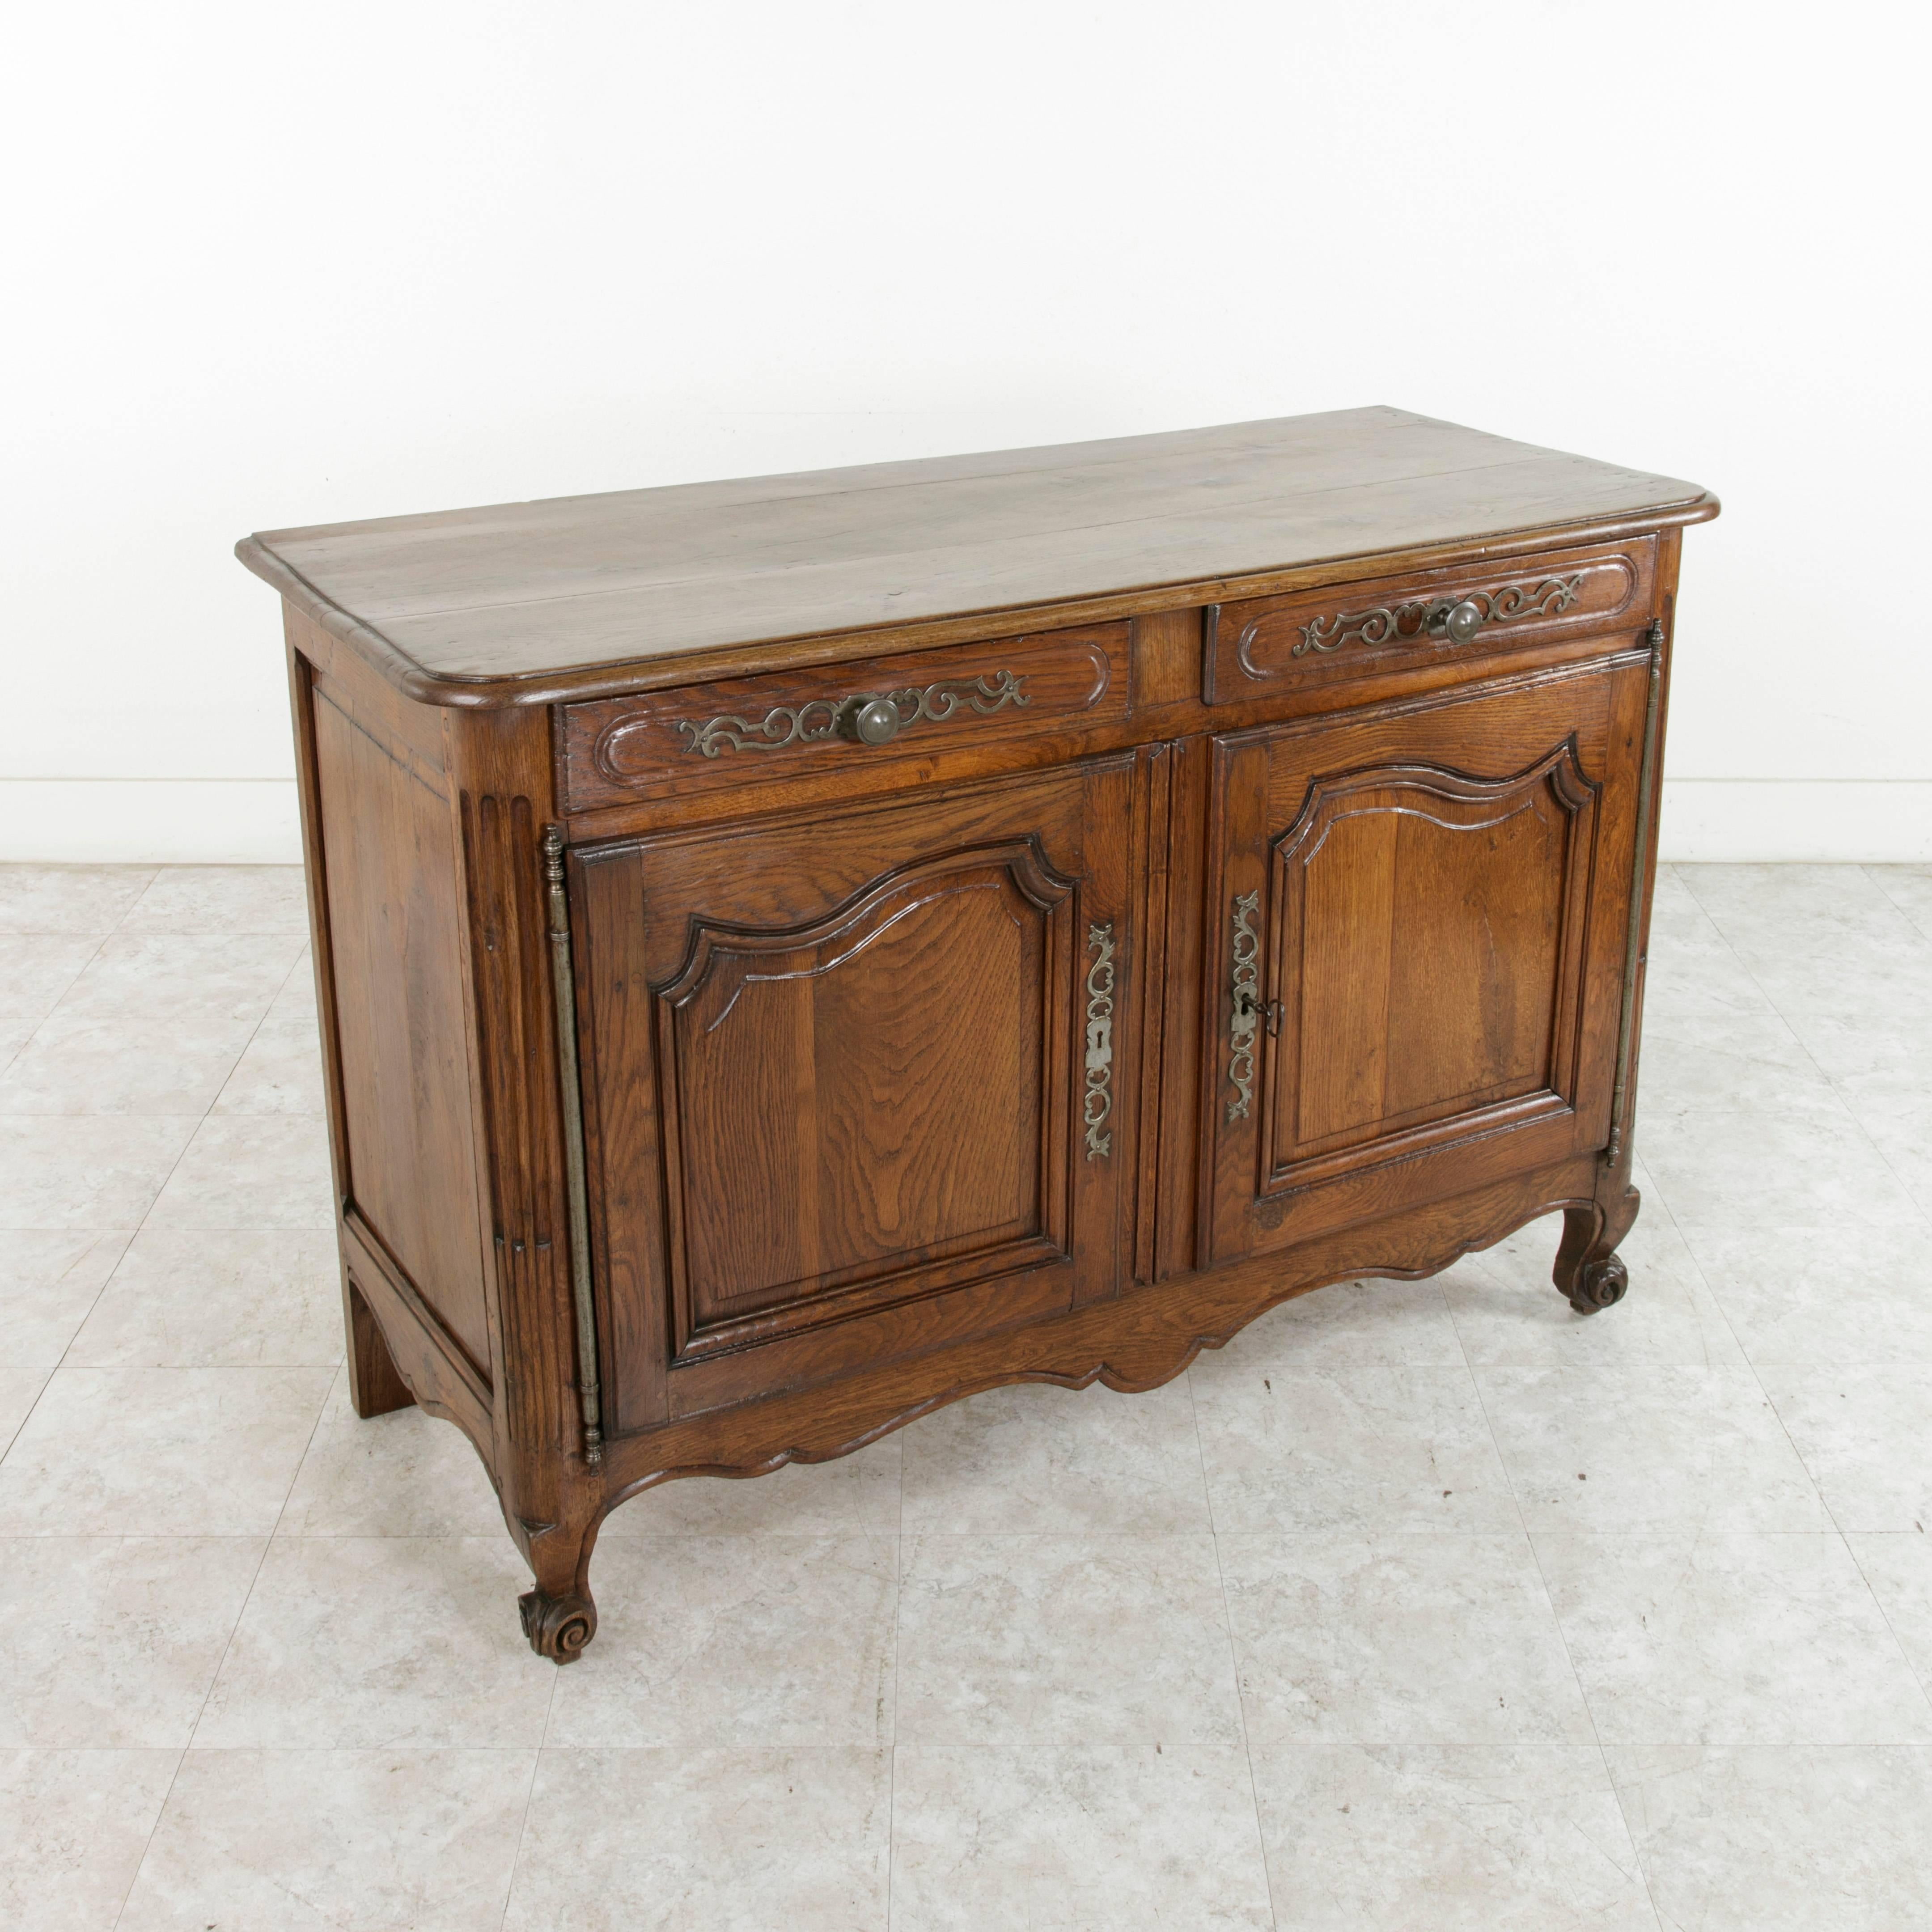 This late 19th century Louis XV style hand-carved oak buffet from Normandy, France, features hand pegged panelled sides and doors and cable fluted rounded corners. A bevelled top and cabriole legs with scrolled feet complete the look. Its original